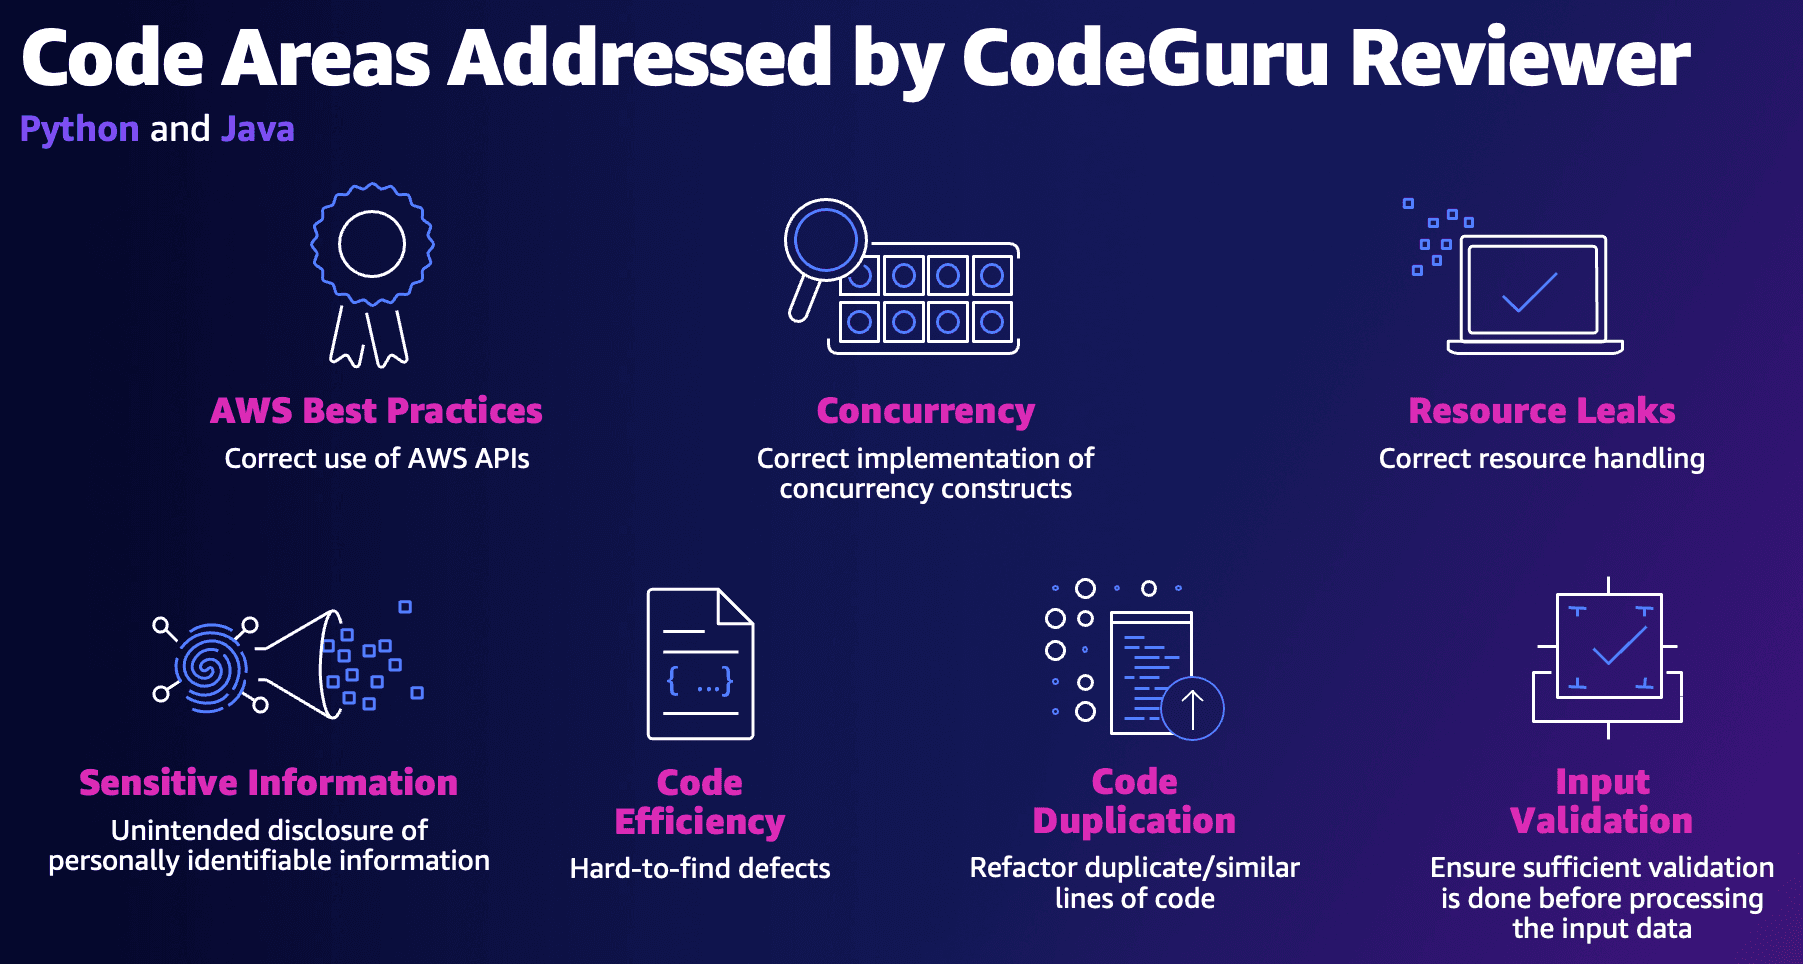 Slide from presentation at AWS Berlin Summit 2022 showing slide title "Code Areas Addressed by CodeGuru Reviewer". Slide shows AWS Best Practices, Concurrency, Resource Leaks, Sensitive Information, Code Efficiency, Code Duplication, and Input Validation areas.